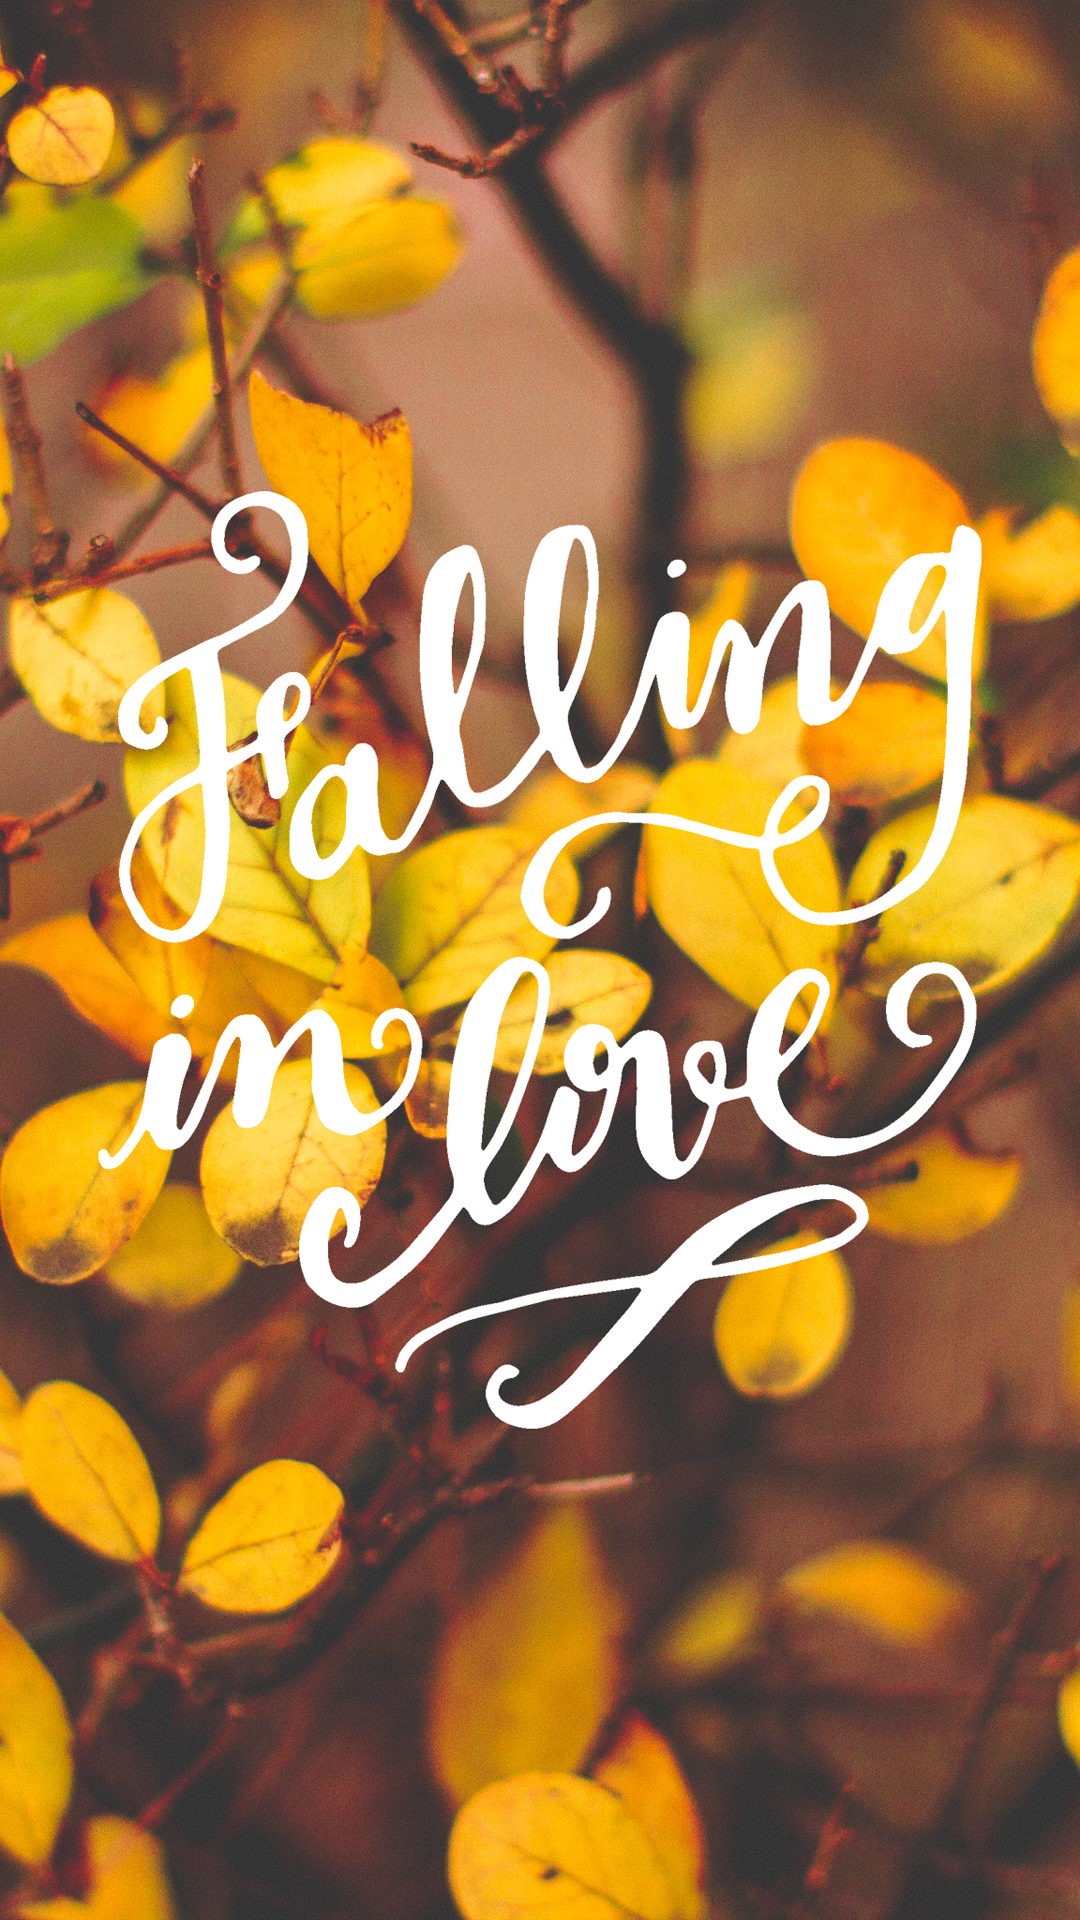 fall in love wallpaper,font,yellow,text,leaf,tree